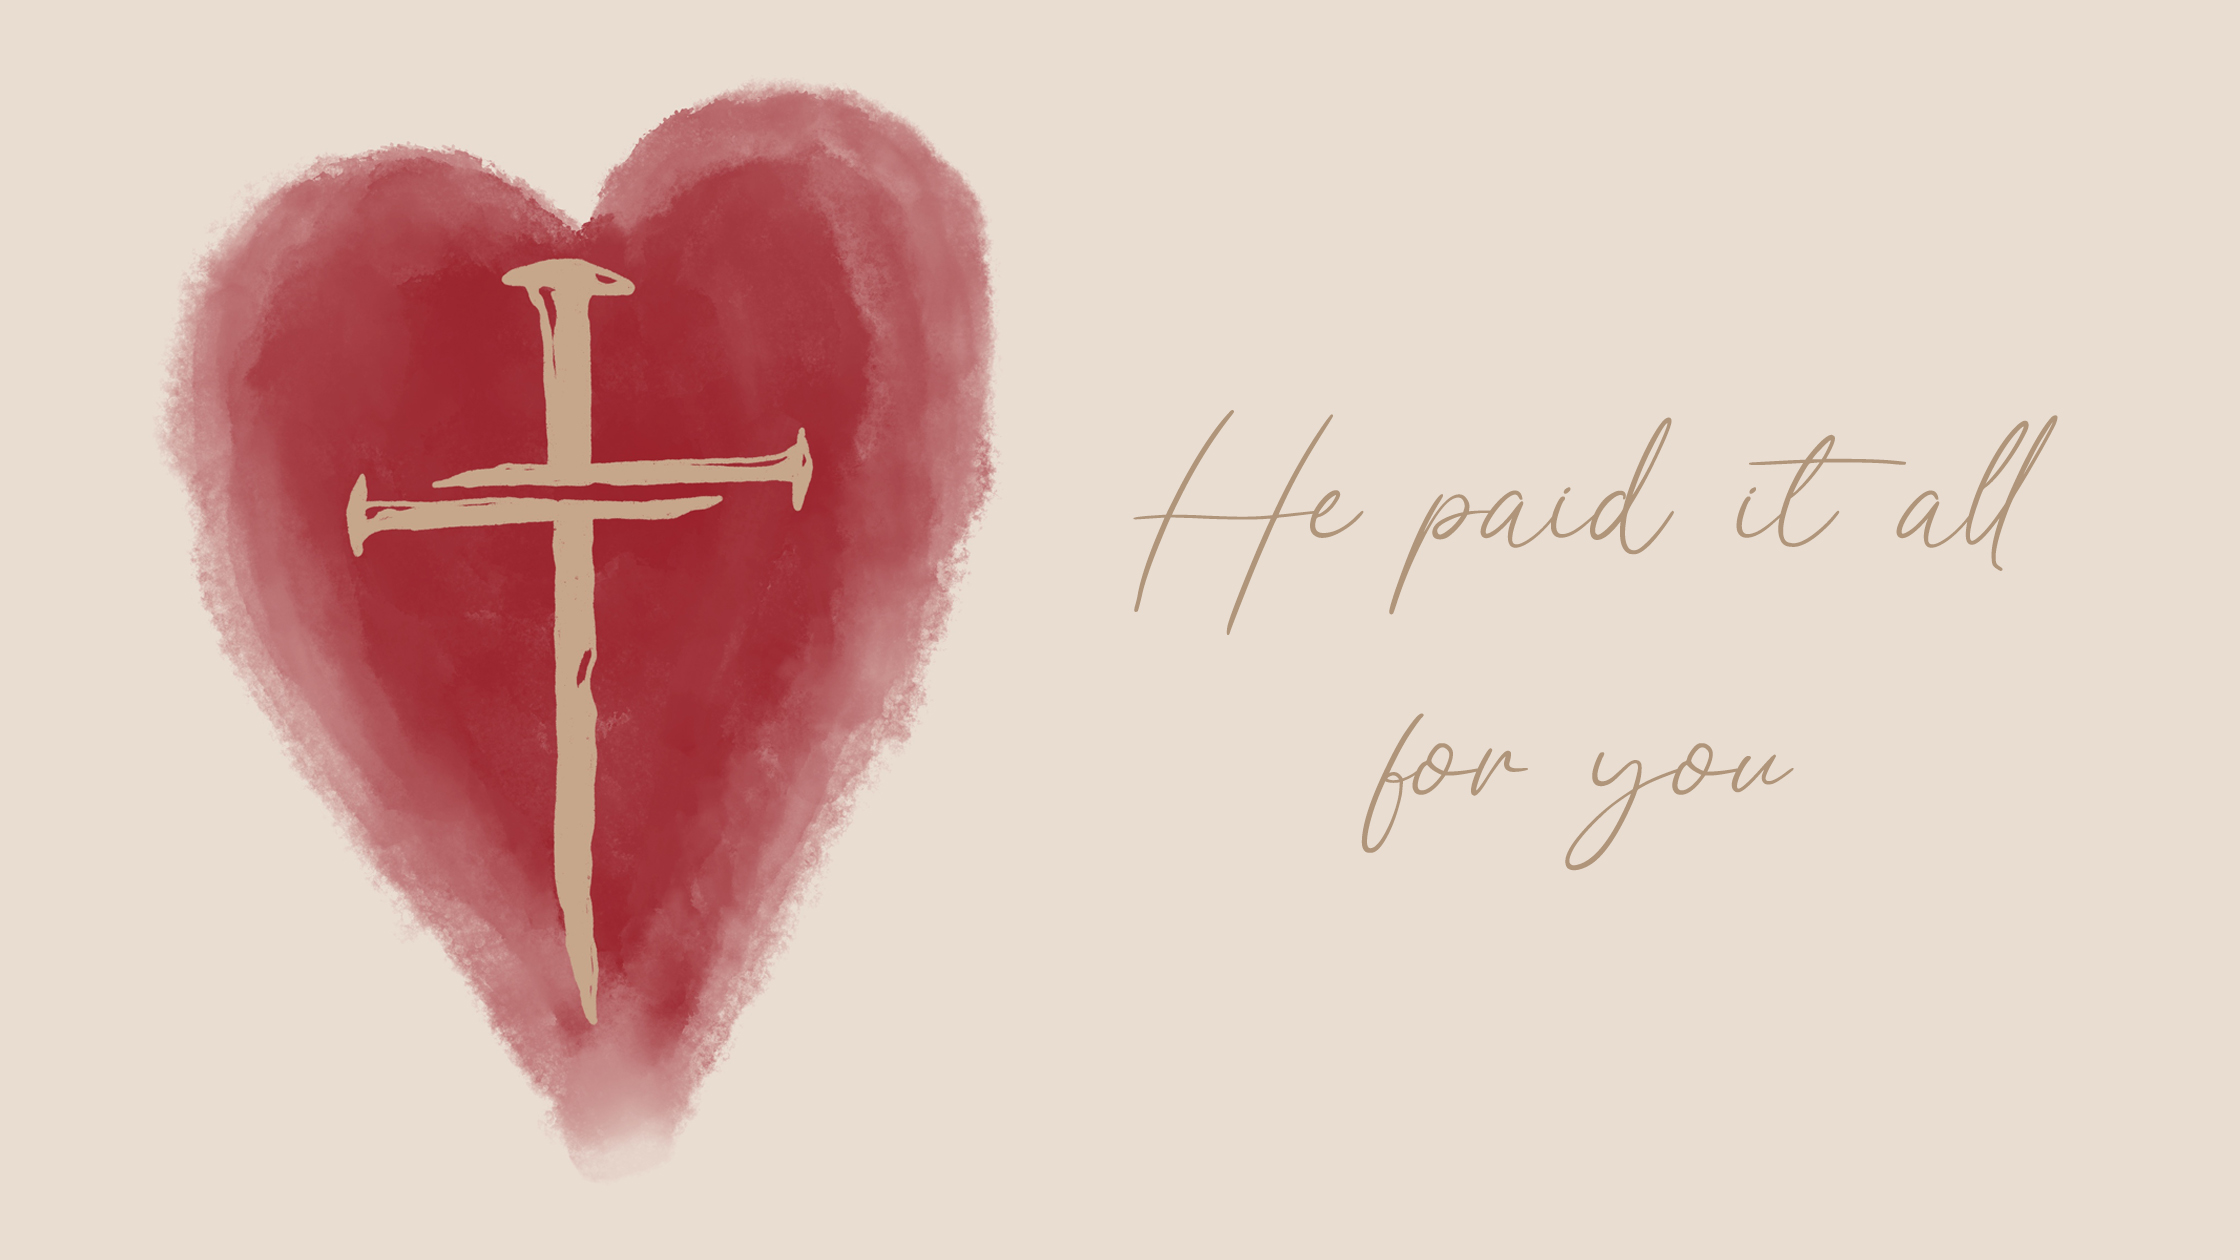 He paid it all for you